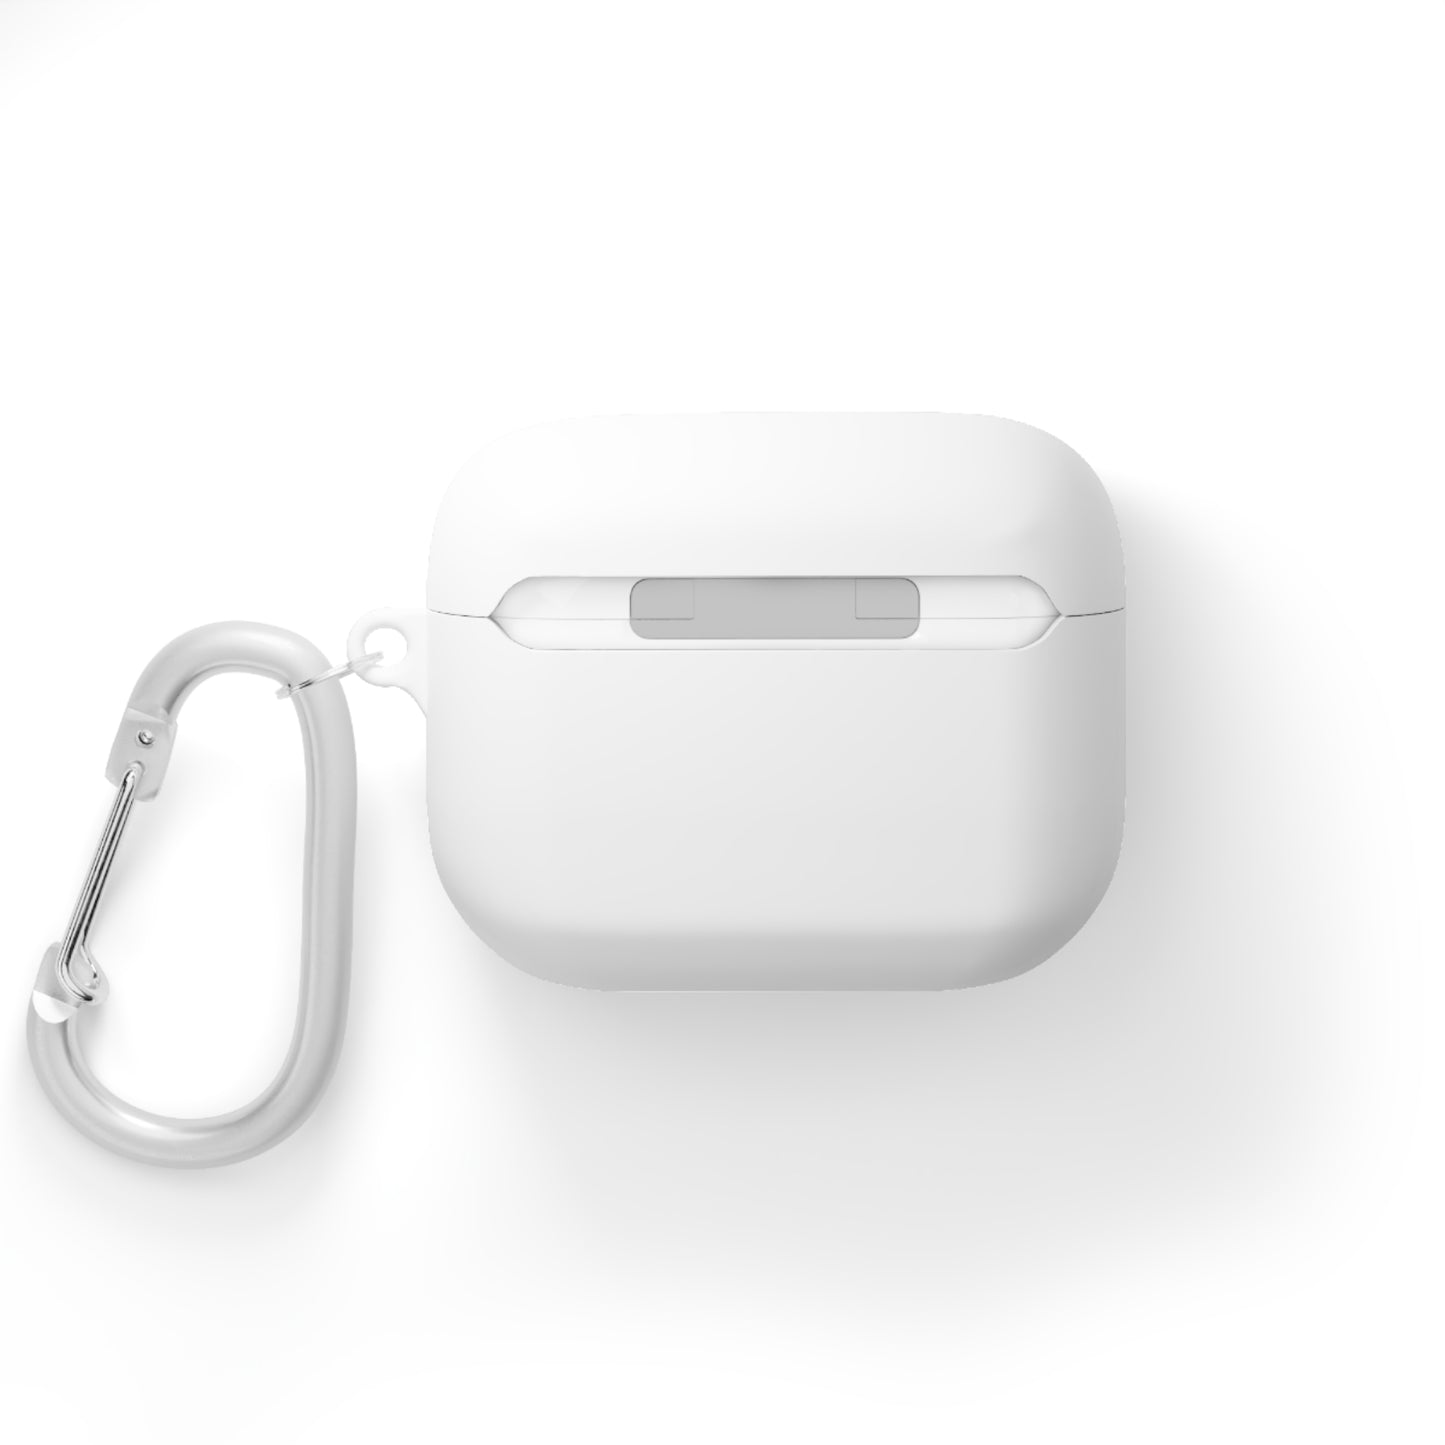 Icky Cargo AirPods / AirPods Pro Case Cover - Wisp Campaign